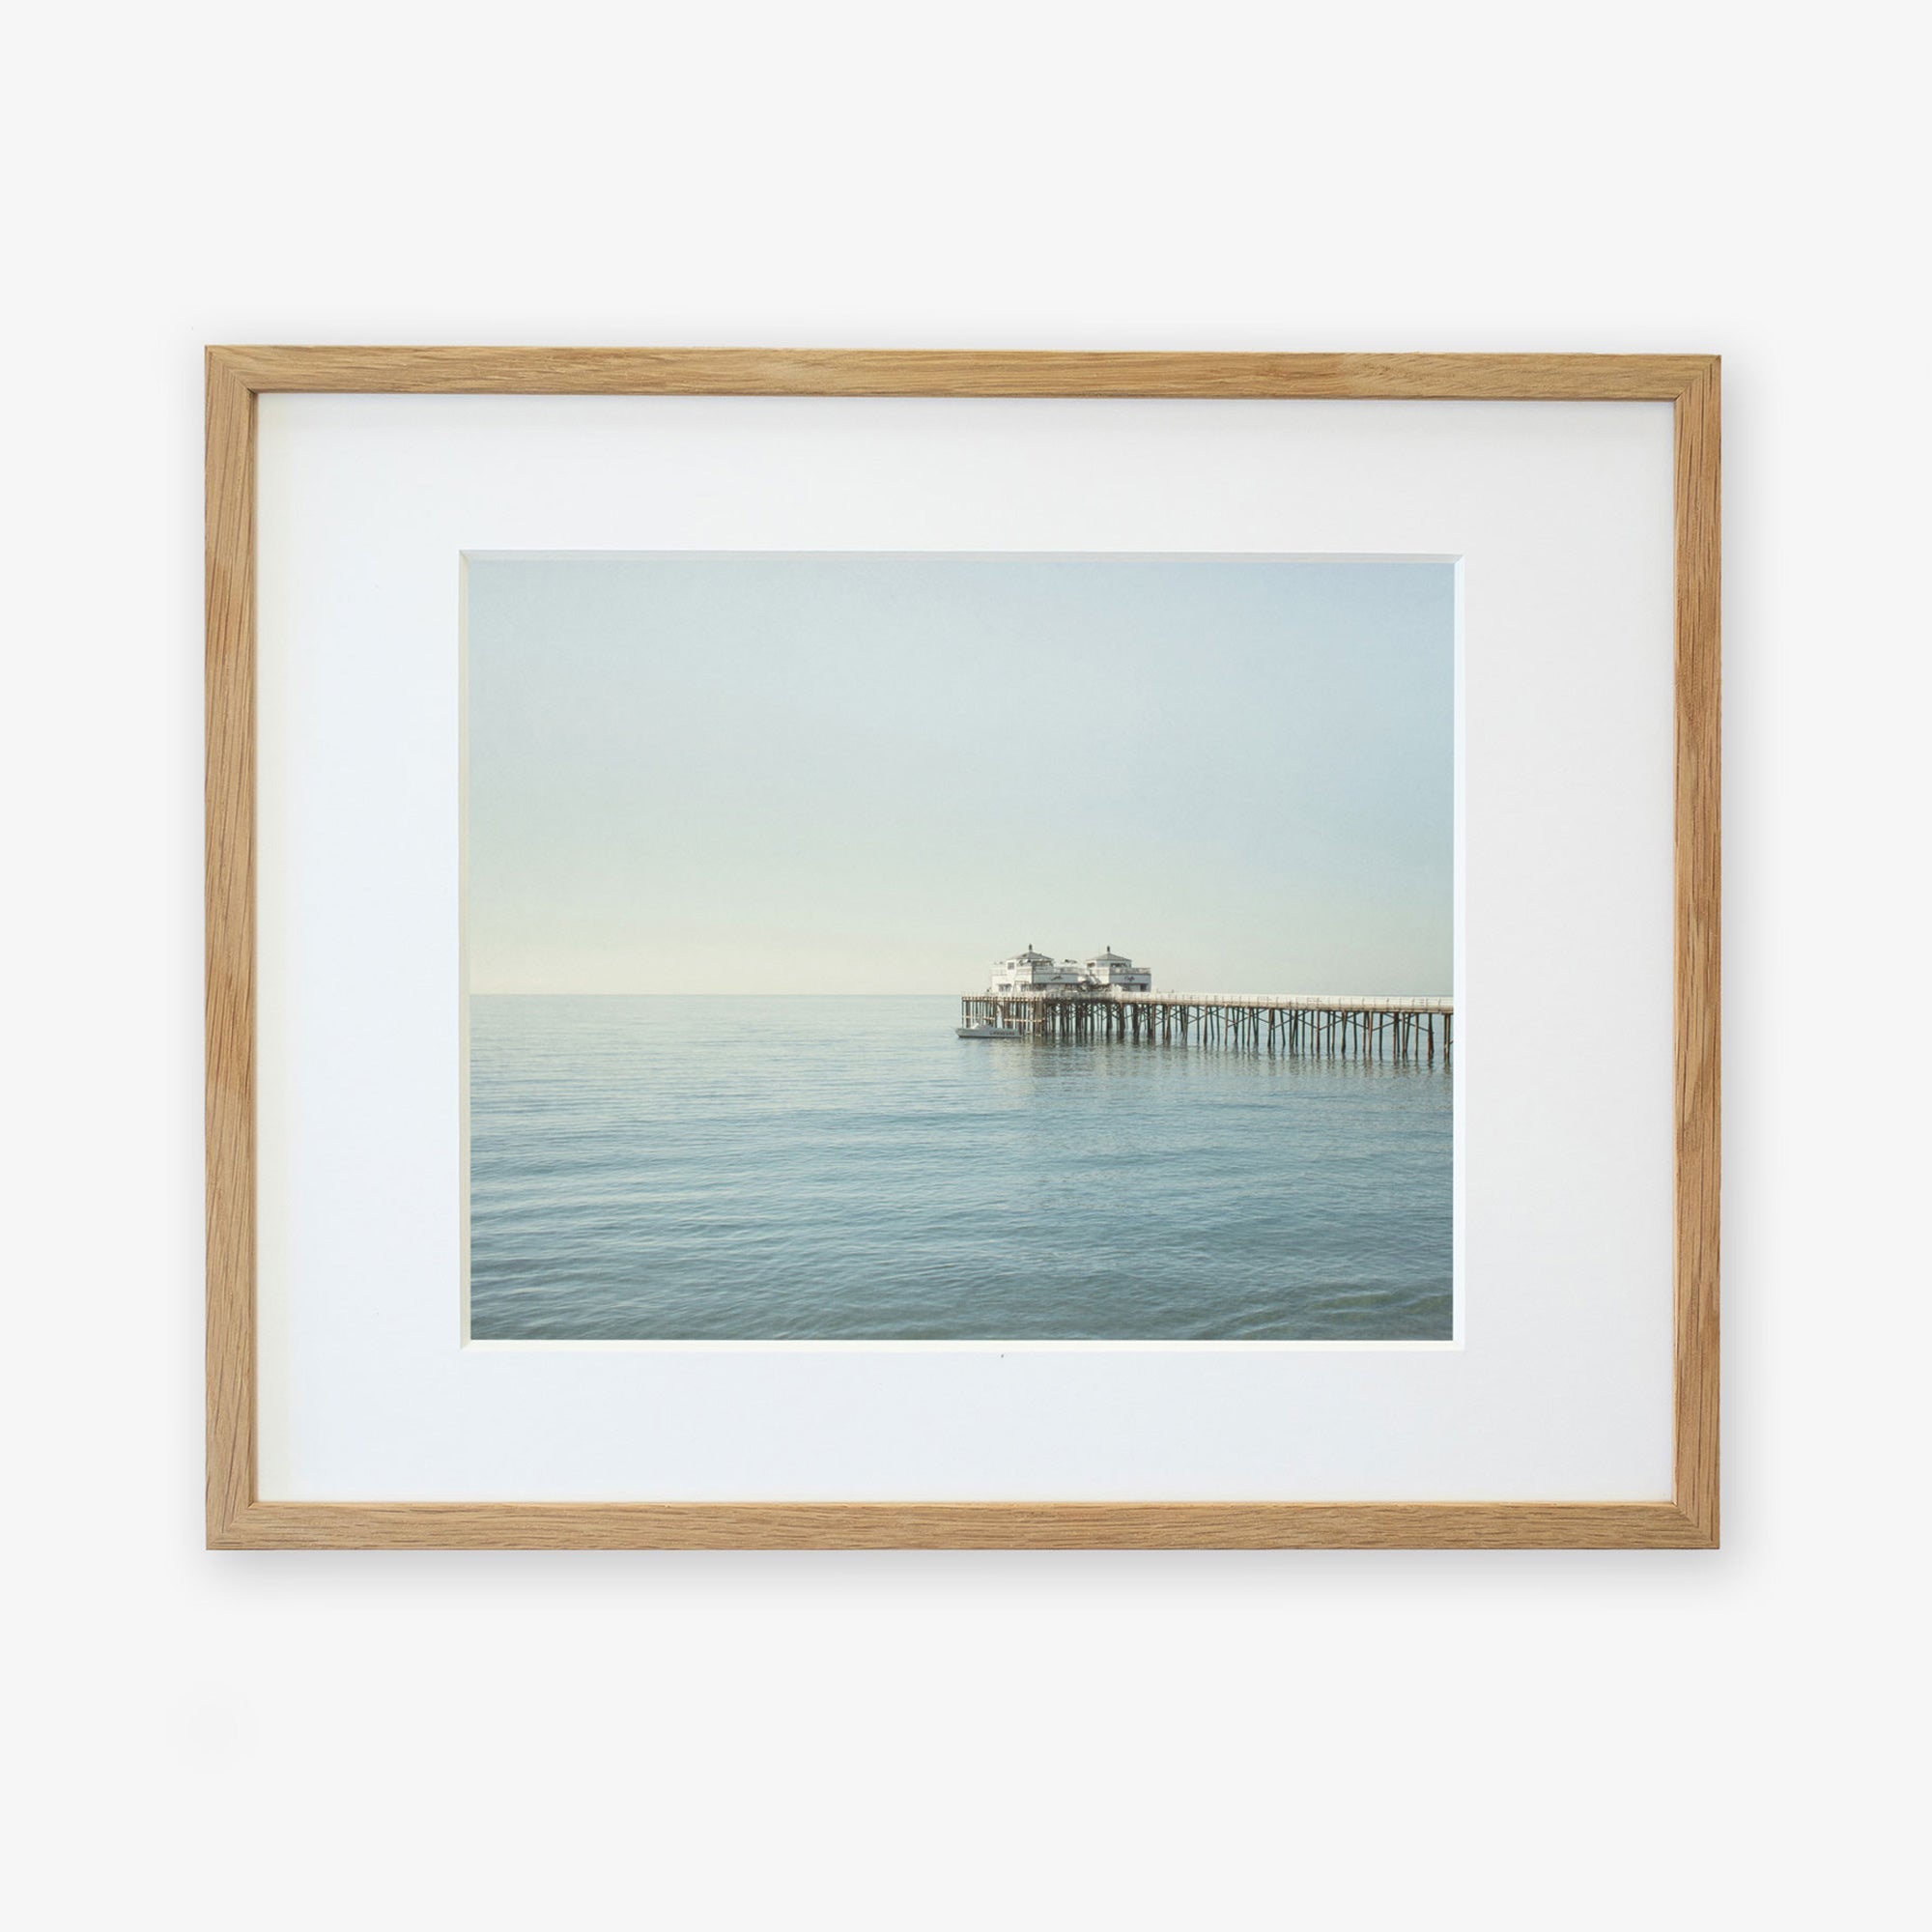 A framed photograph of Malibu Pier extending into the sea under a calm sky, displayed against a white background - Offley Green&#39;s Coastal Print of Malibu Pier in California &#39;All Calm in Malibu&#39;